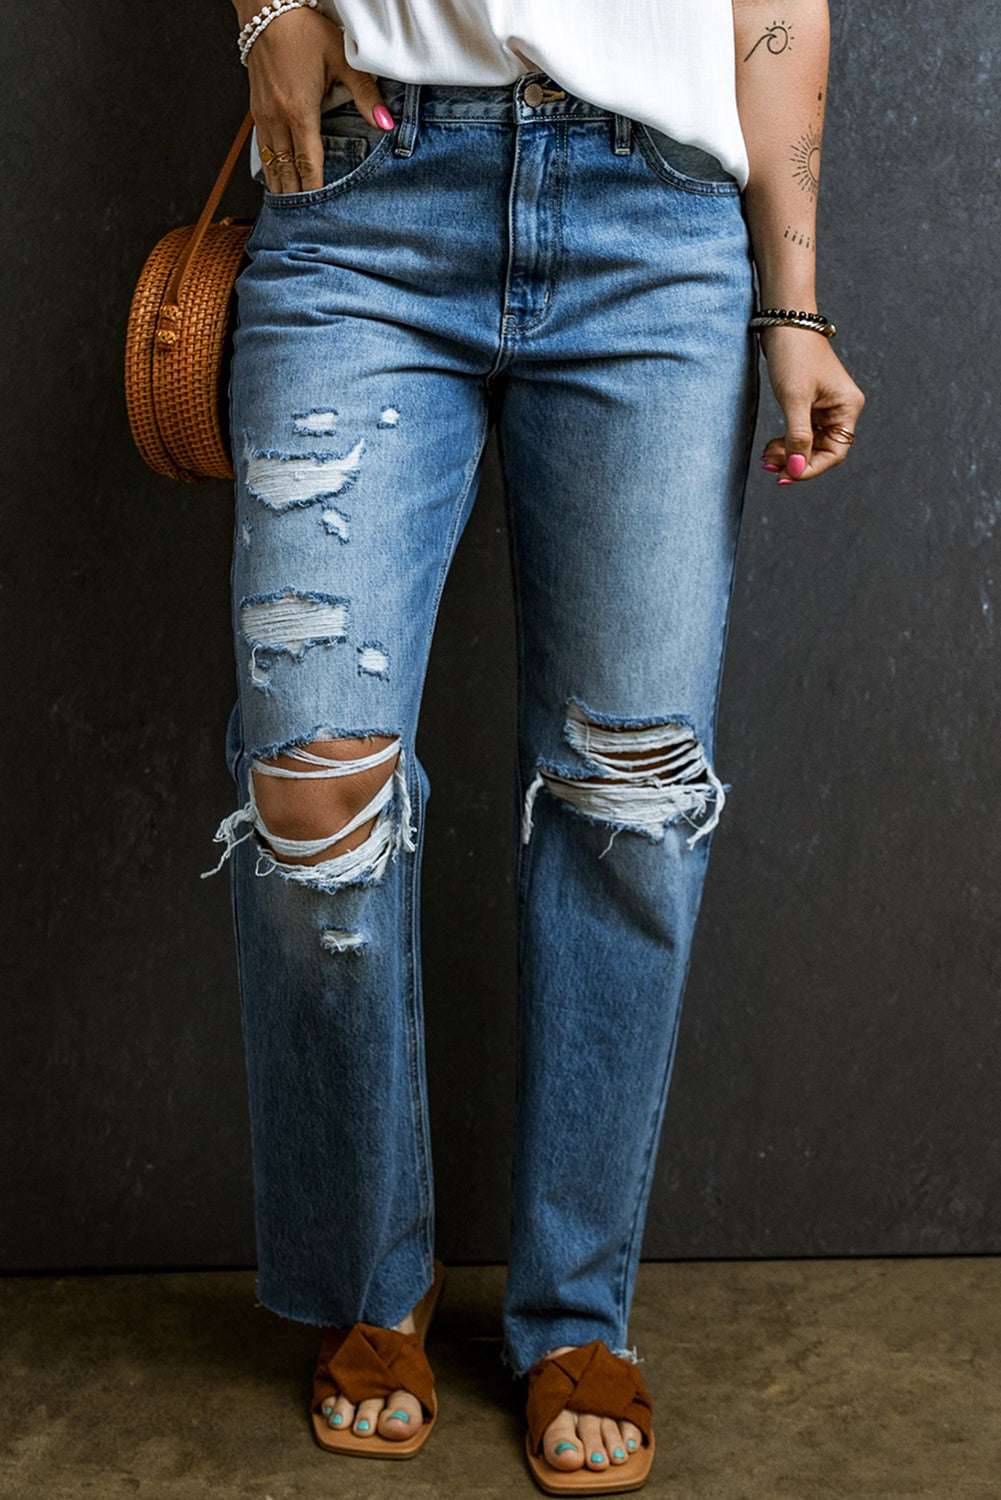 Trendy Distressed Raw Hem Denim Jeans with Convenient Pockets - Ideal for Casual Chic Looks!